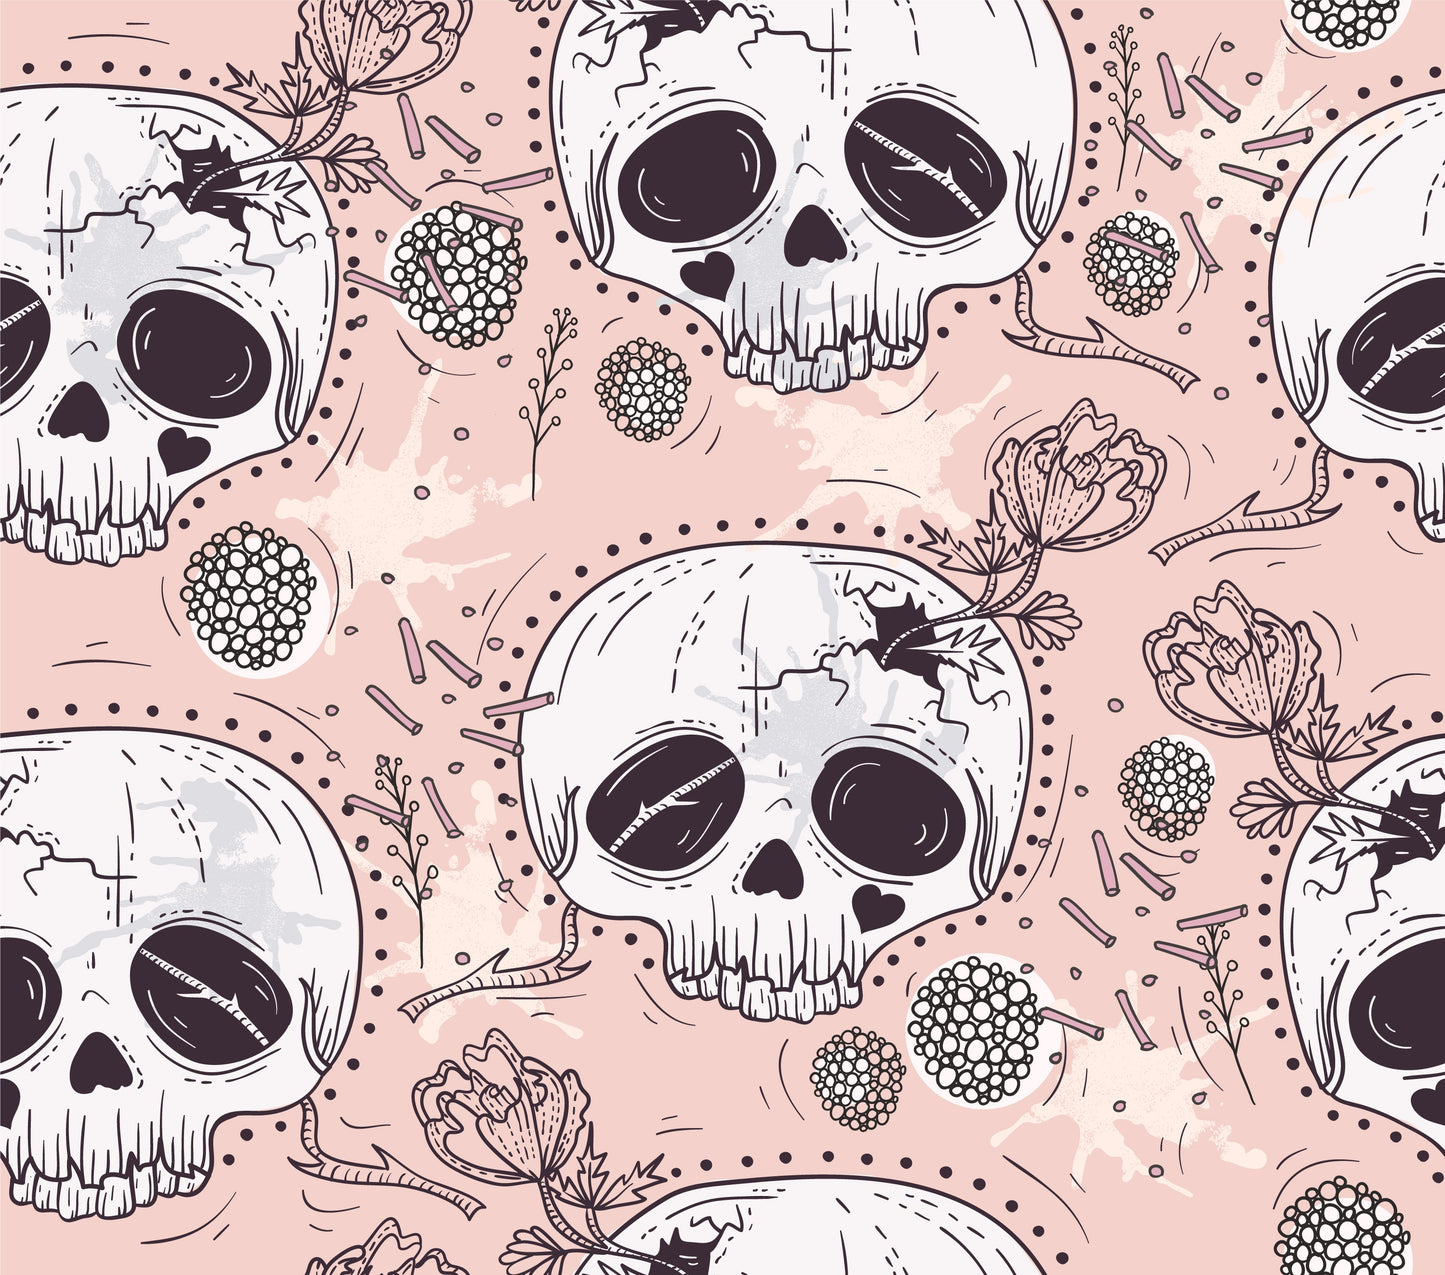 Chinless Skulls (Tattoo Style) (Faux Leather - 8" x 13" Printed Sheet)